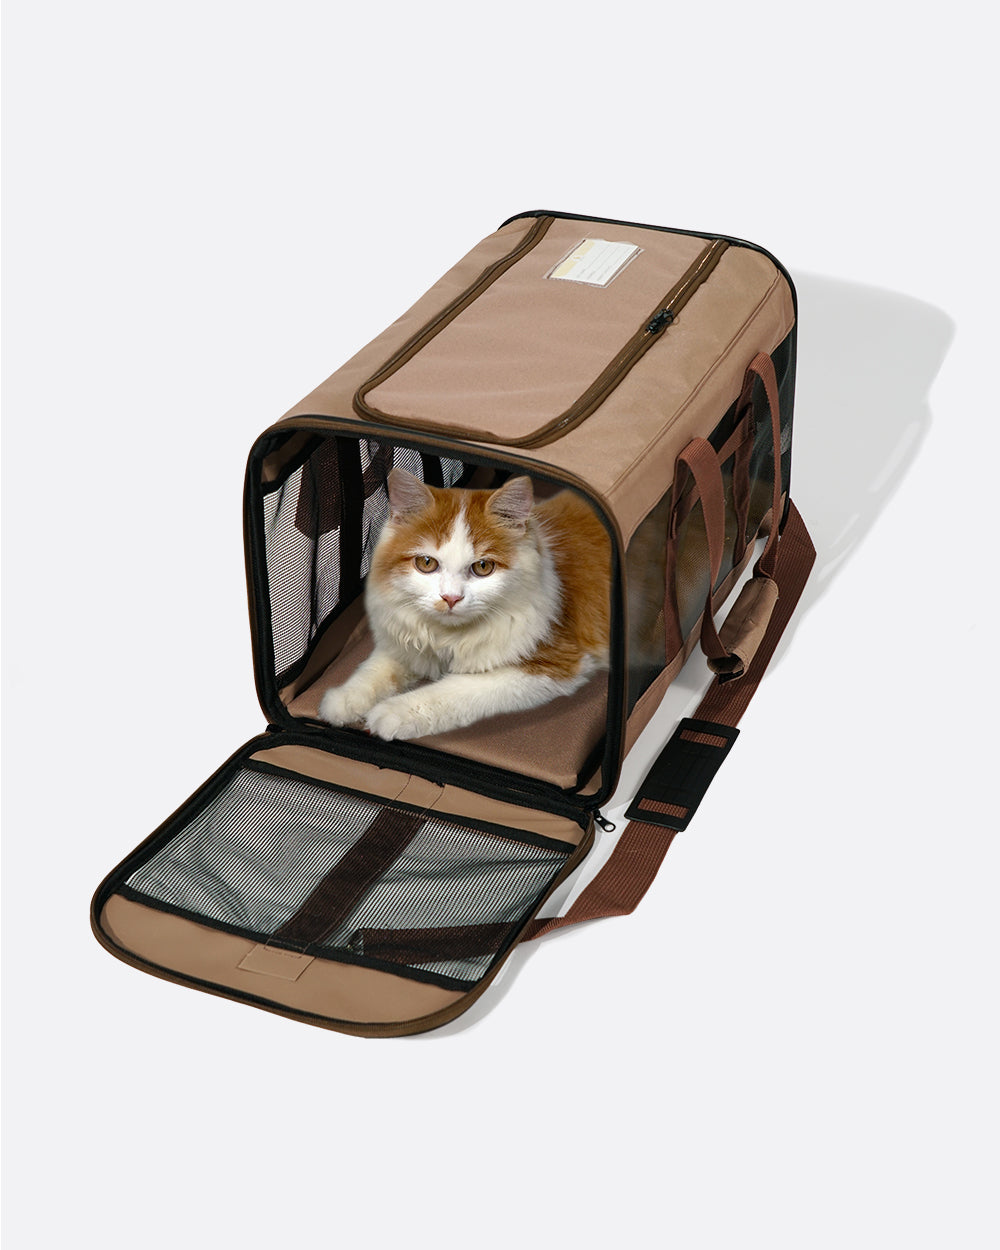 Portable Pet Travel Carrier - Choco Brown